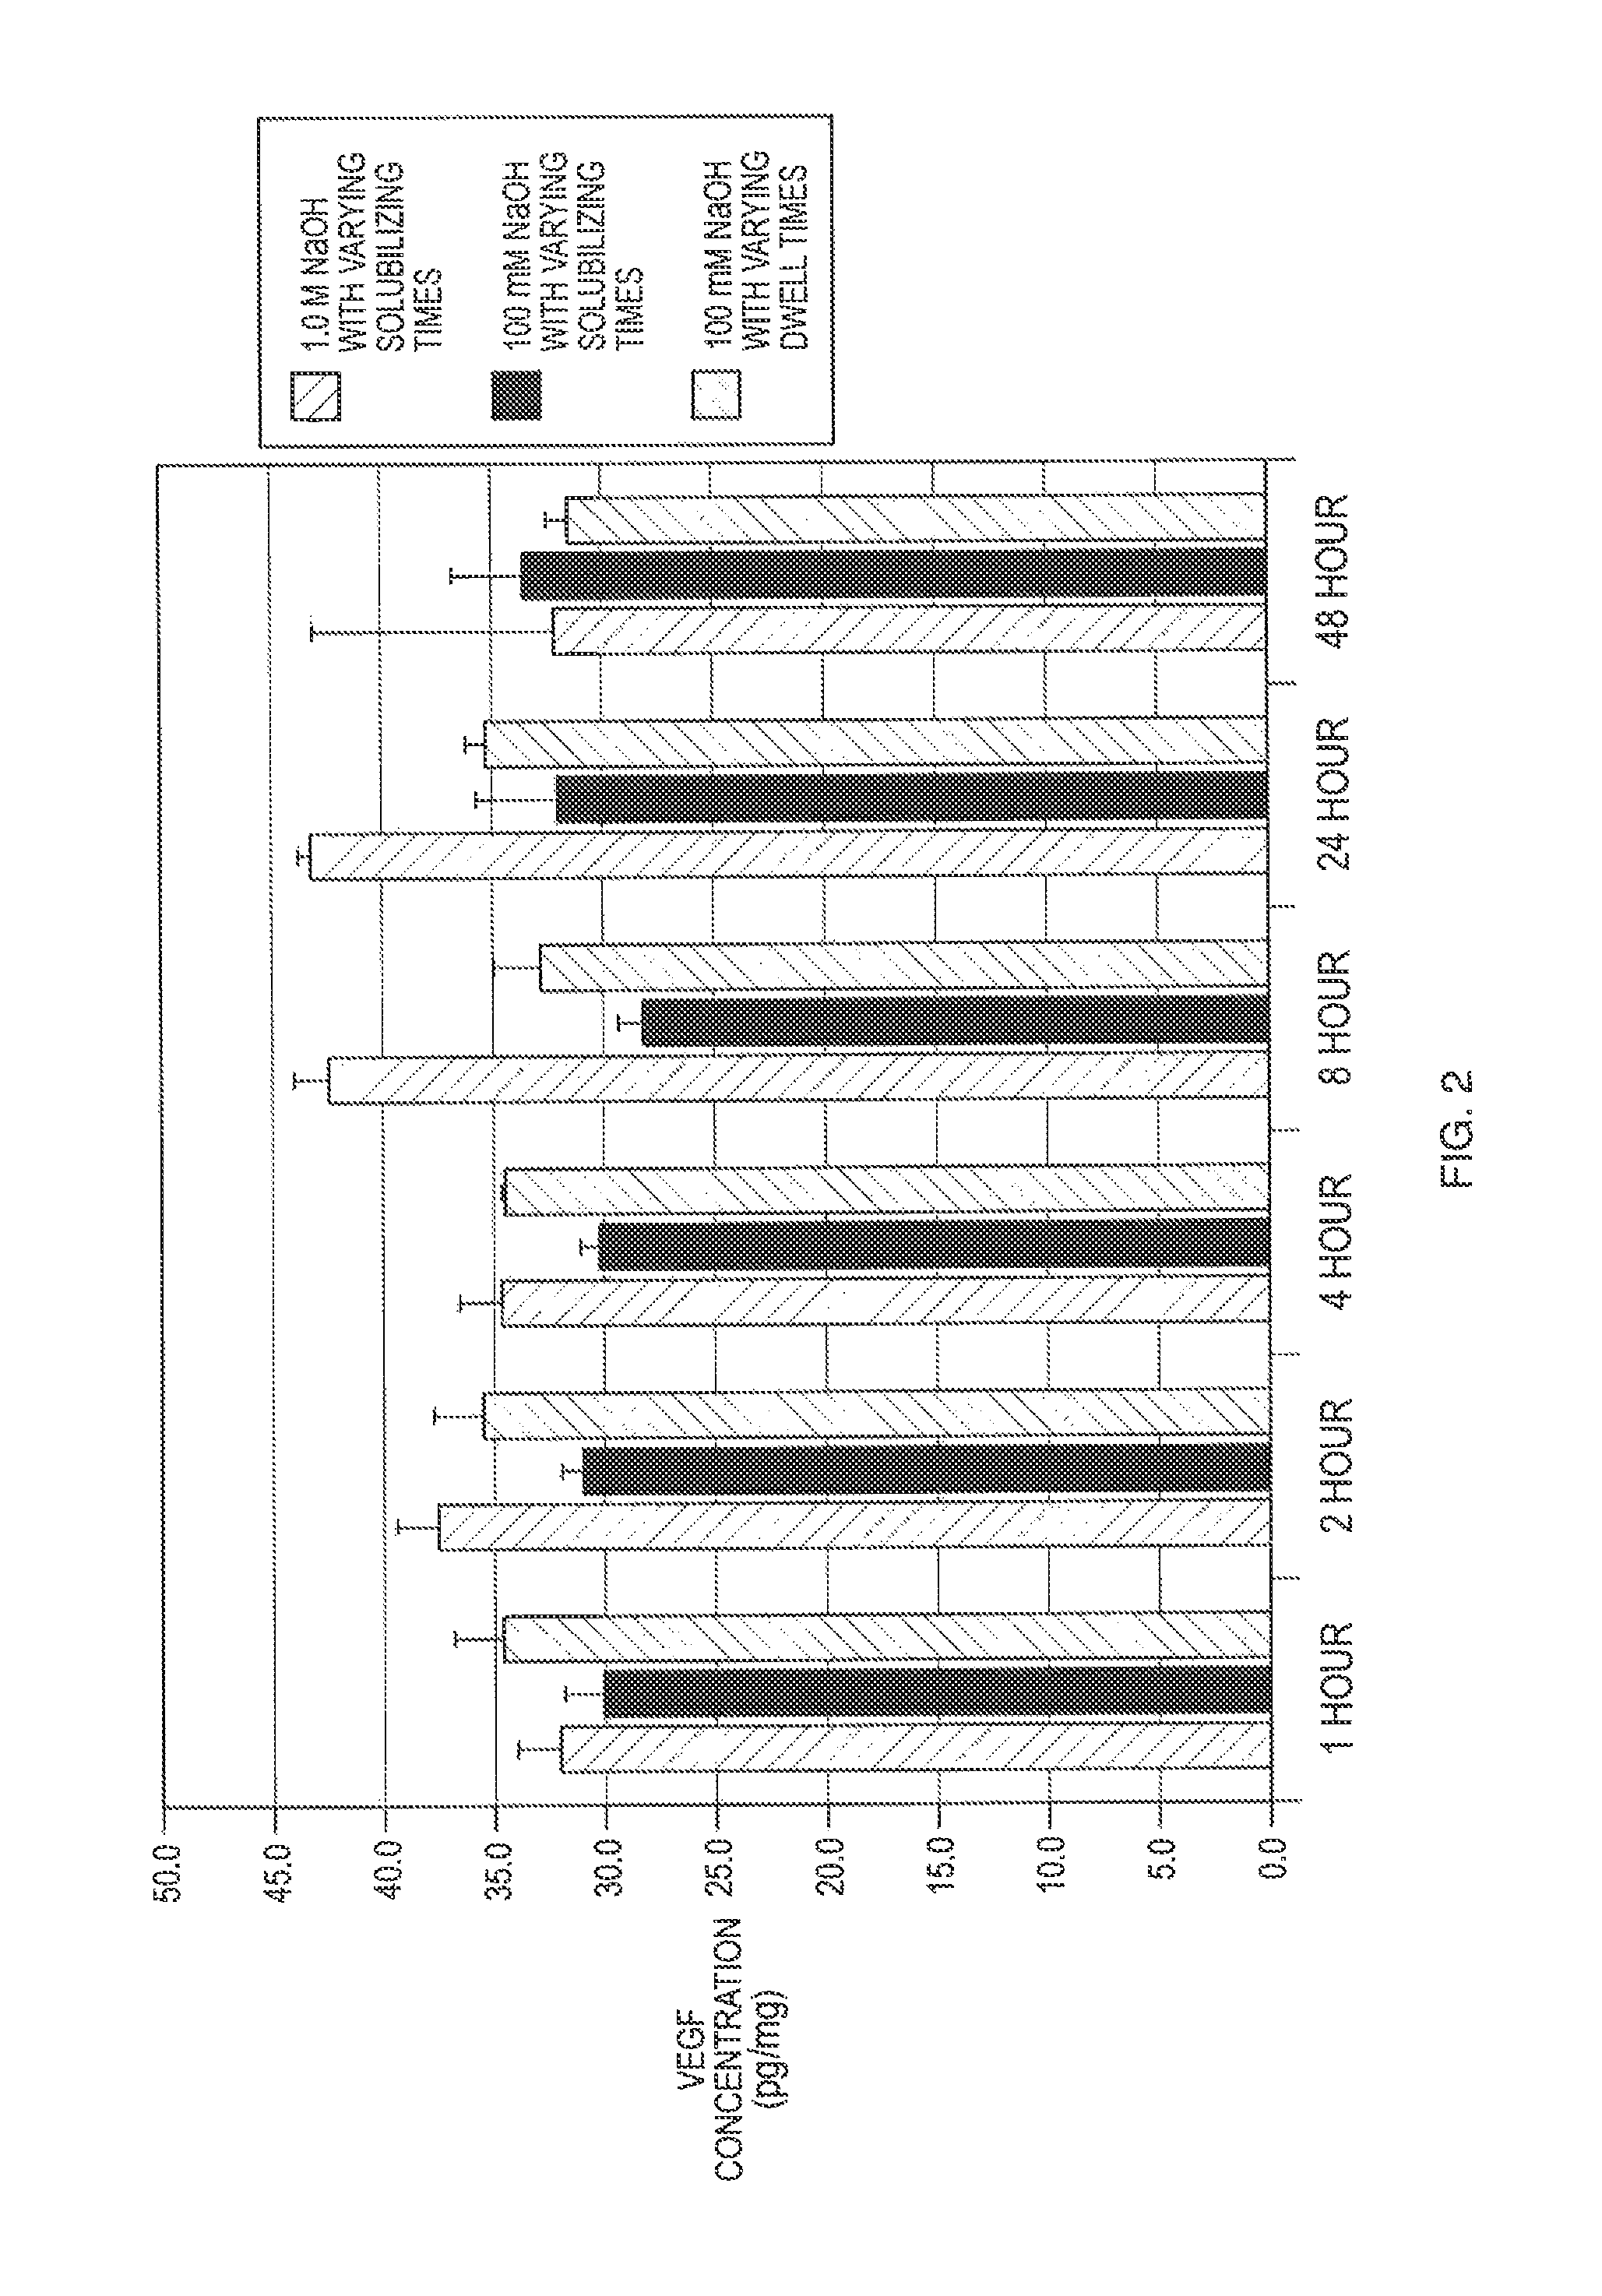 Methods of manufacturing bioactive gels from extracellular matrix material